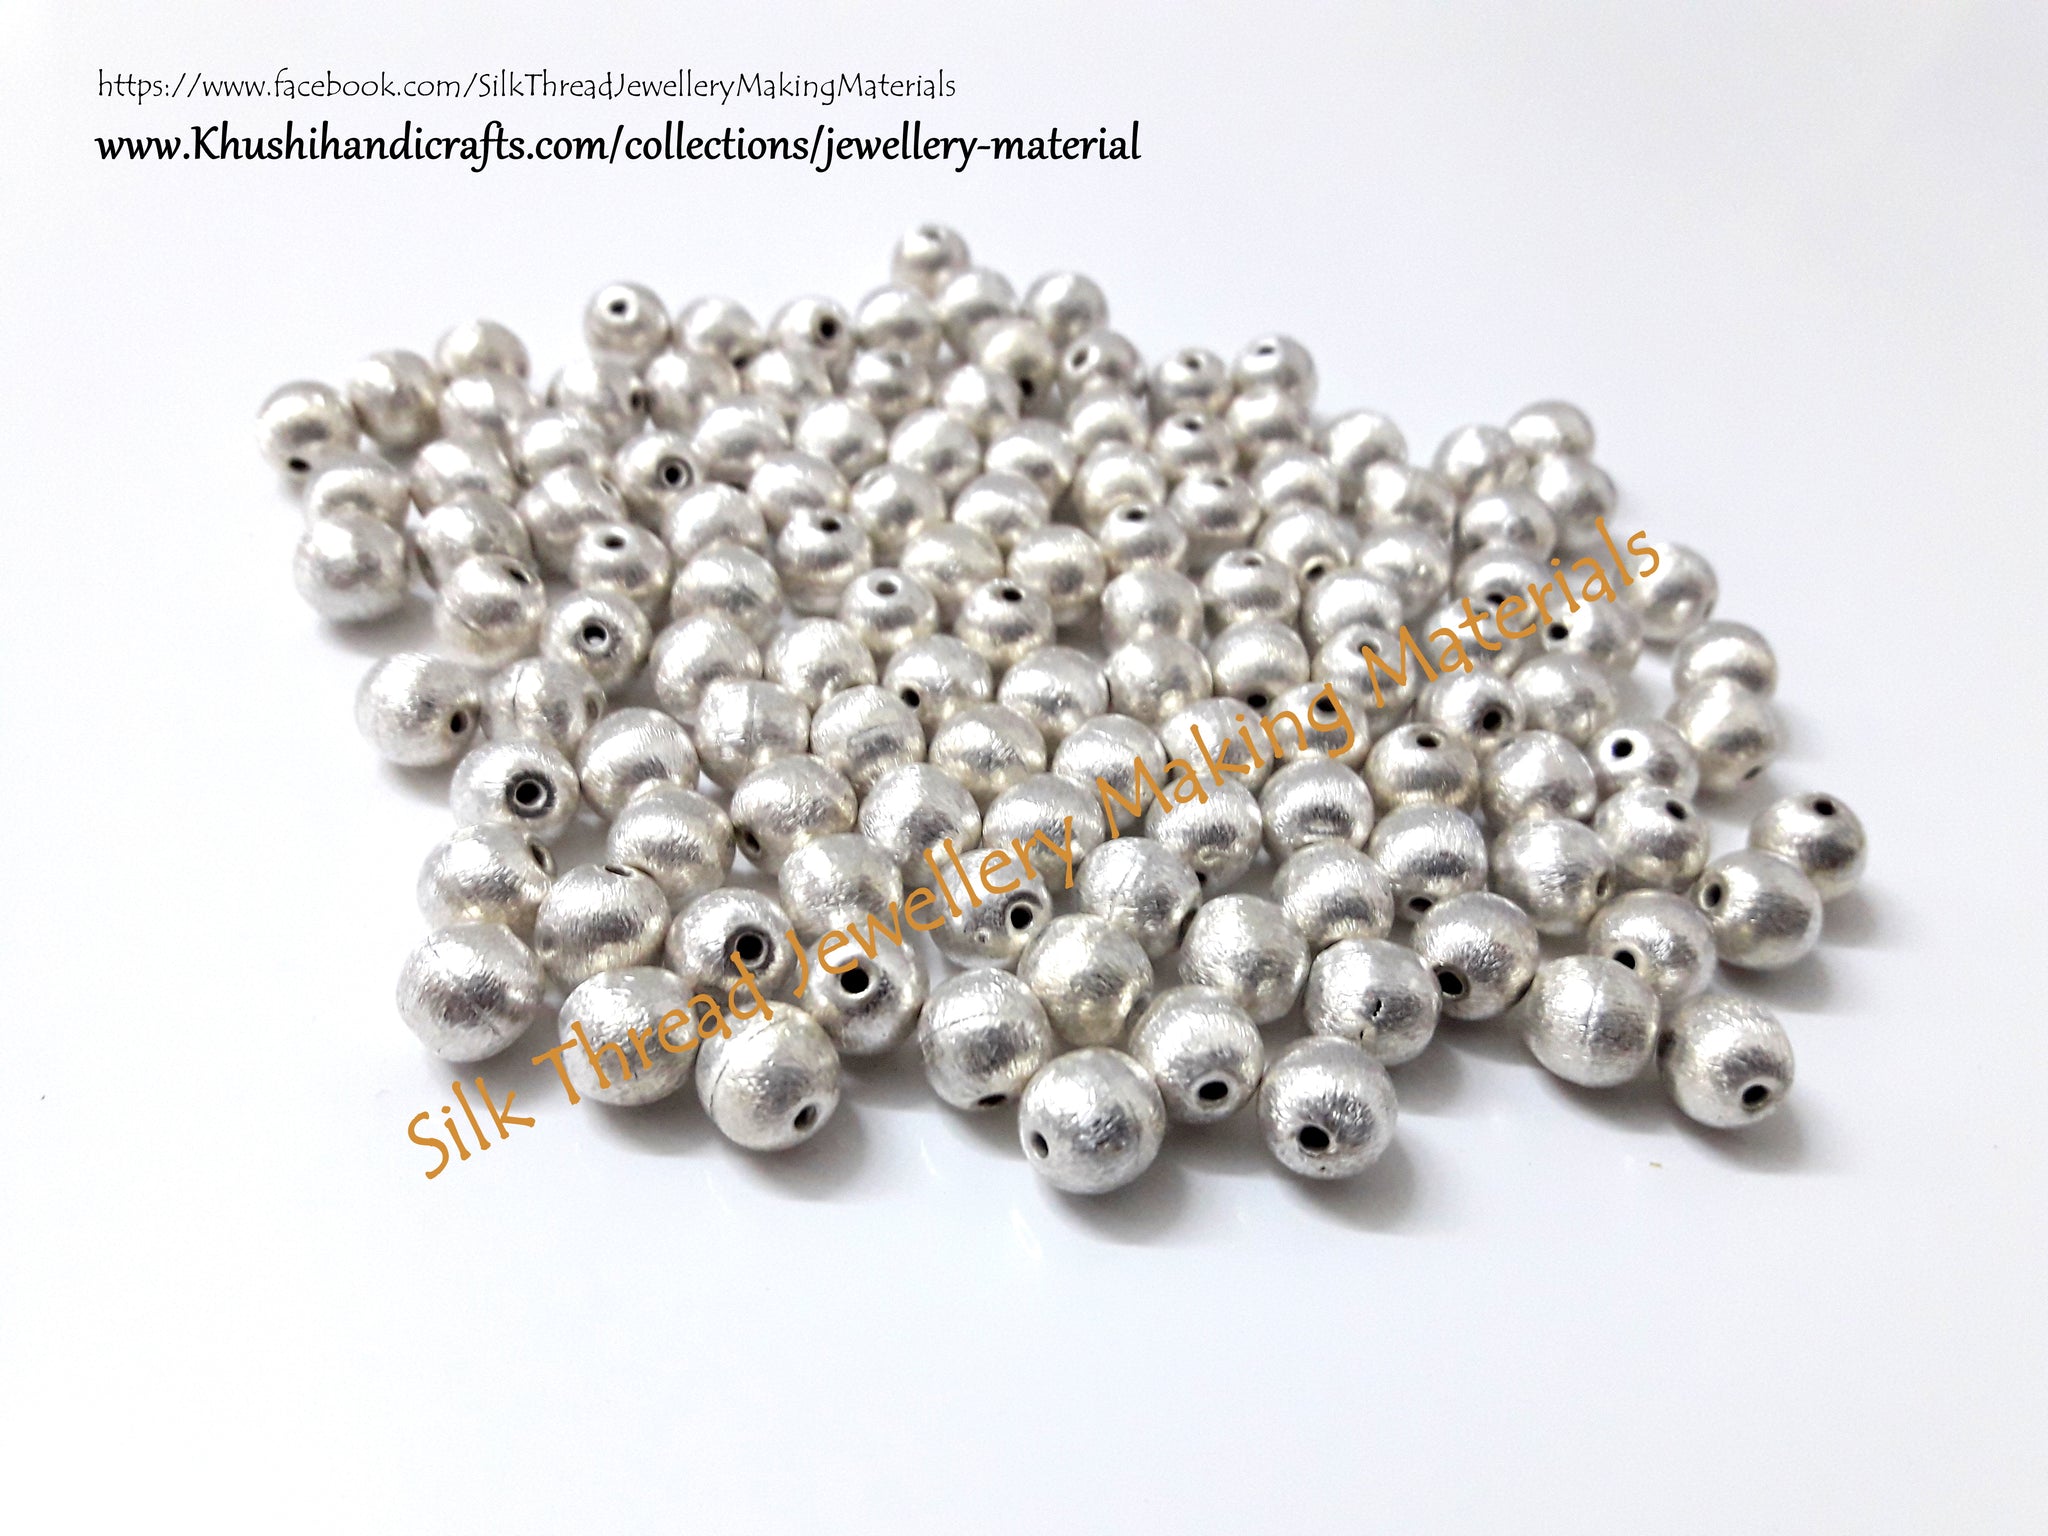 Brushed Round Silver Beads 8mm. Sold per piece! - Khushi Handmade Jewellery